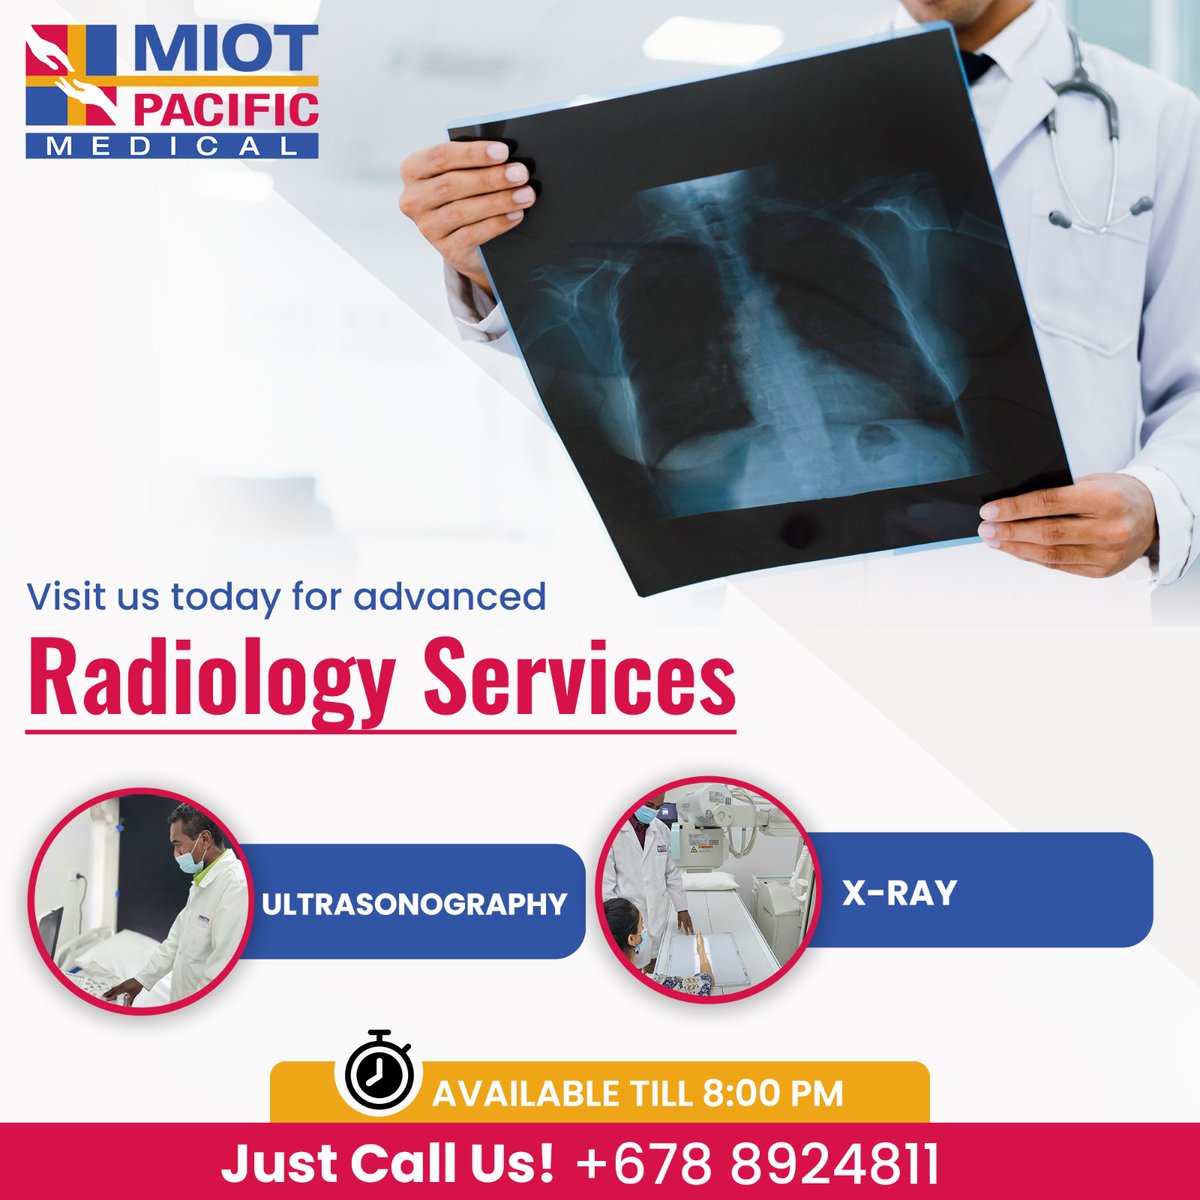 Early detection is the key!!
Book your appointment with us for advanced radiology services!
Feel free to call us at 8924811
Visit our website at mpm.com.fj

#XRay #Sonography #SonographyinFiji #ultrasound #ultrasoundinFiji #ultrasoundscan #radiology #radiologis